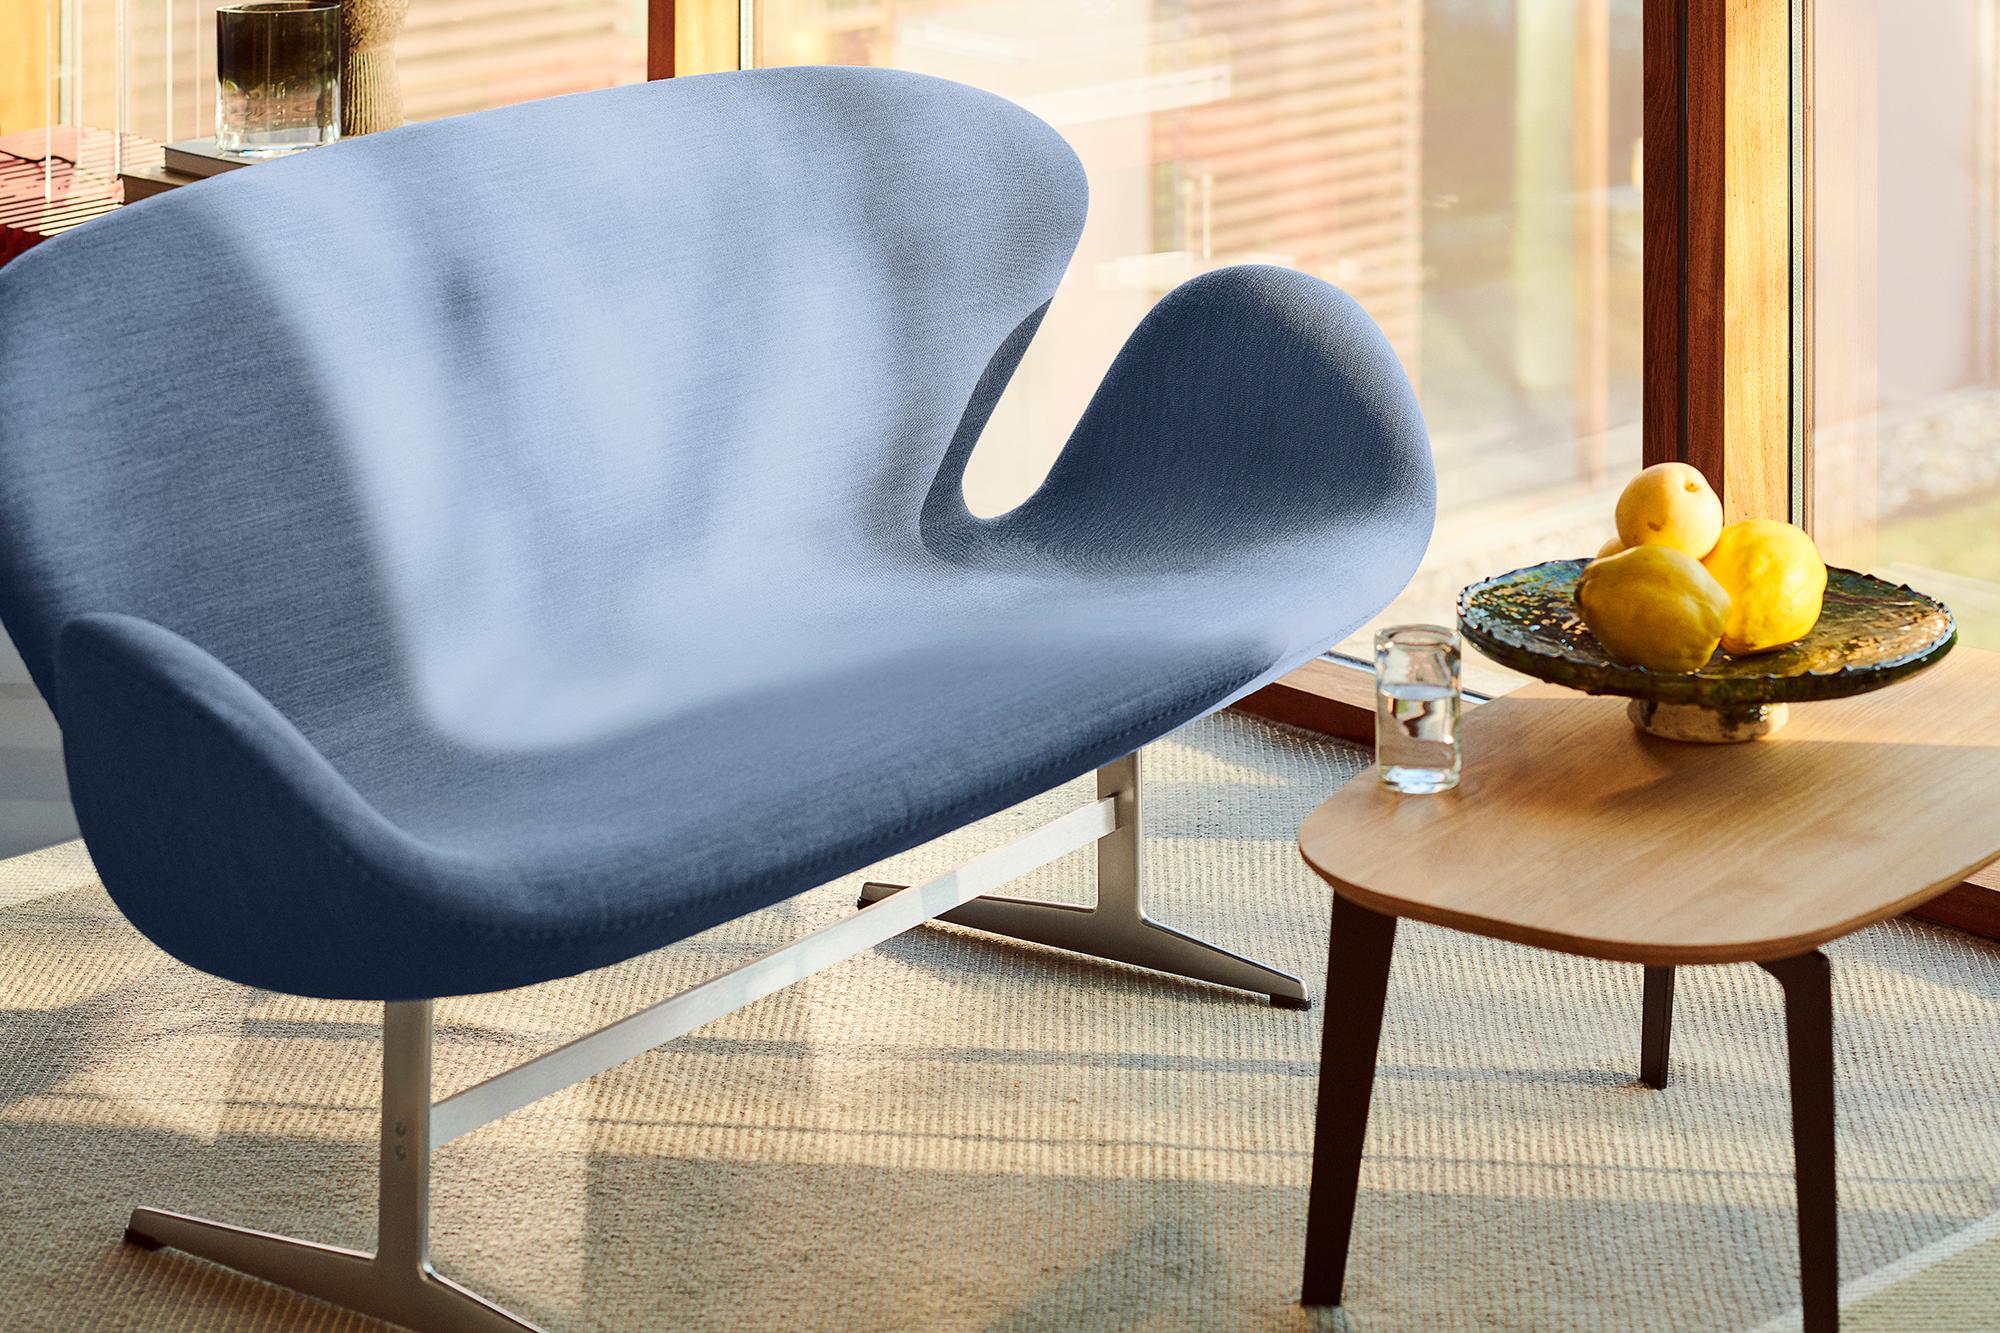 Arne Jacobsen 'Swan' Sofa for Fritz Hansen in Fabric Upholstery (Cat. 3).

Established in 1872, Fritz Hansen has become synonymous with legendary Danish design. Combining timeless craftsmanship with an emphasis on sustainability, the brand’s